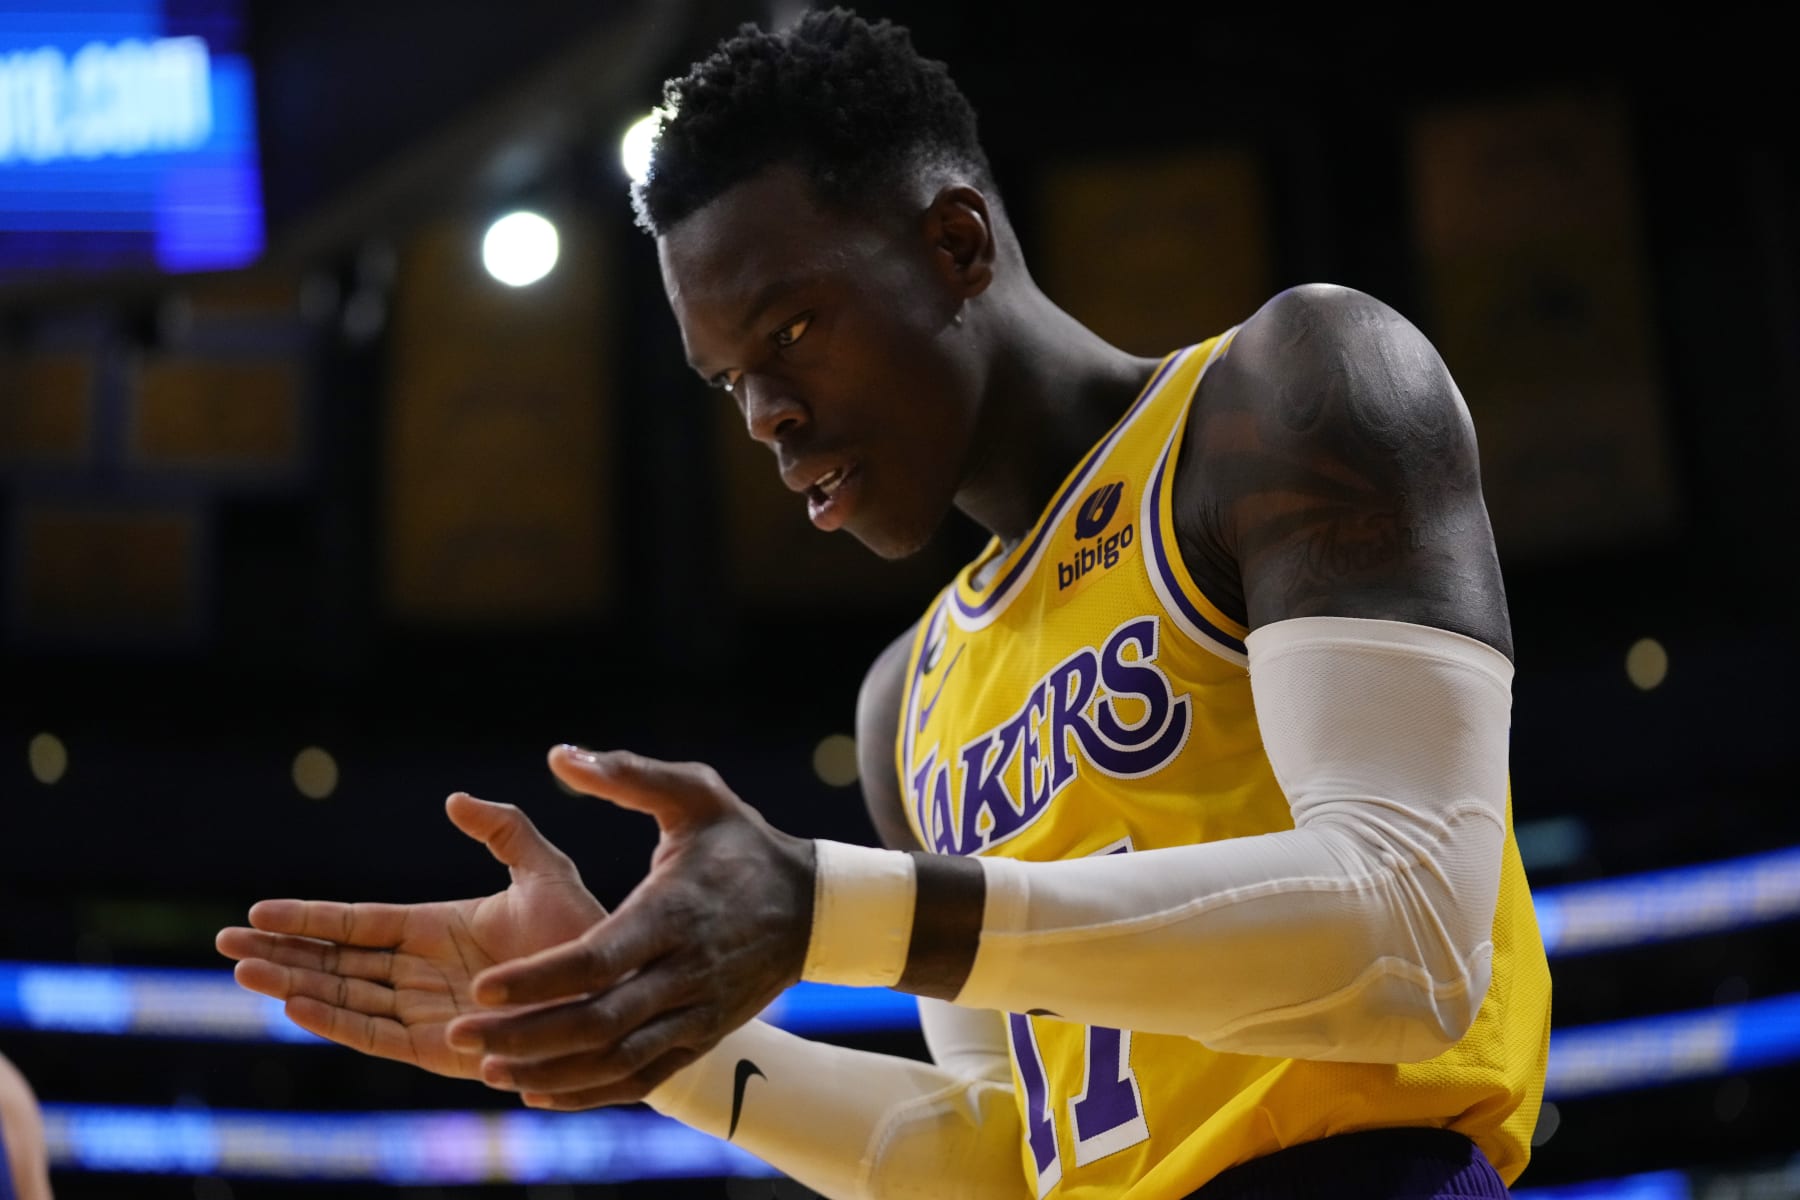 Los Angeles Lakers: Dennis Schroder is the third star in LA